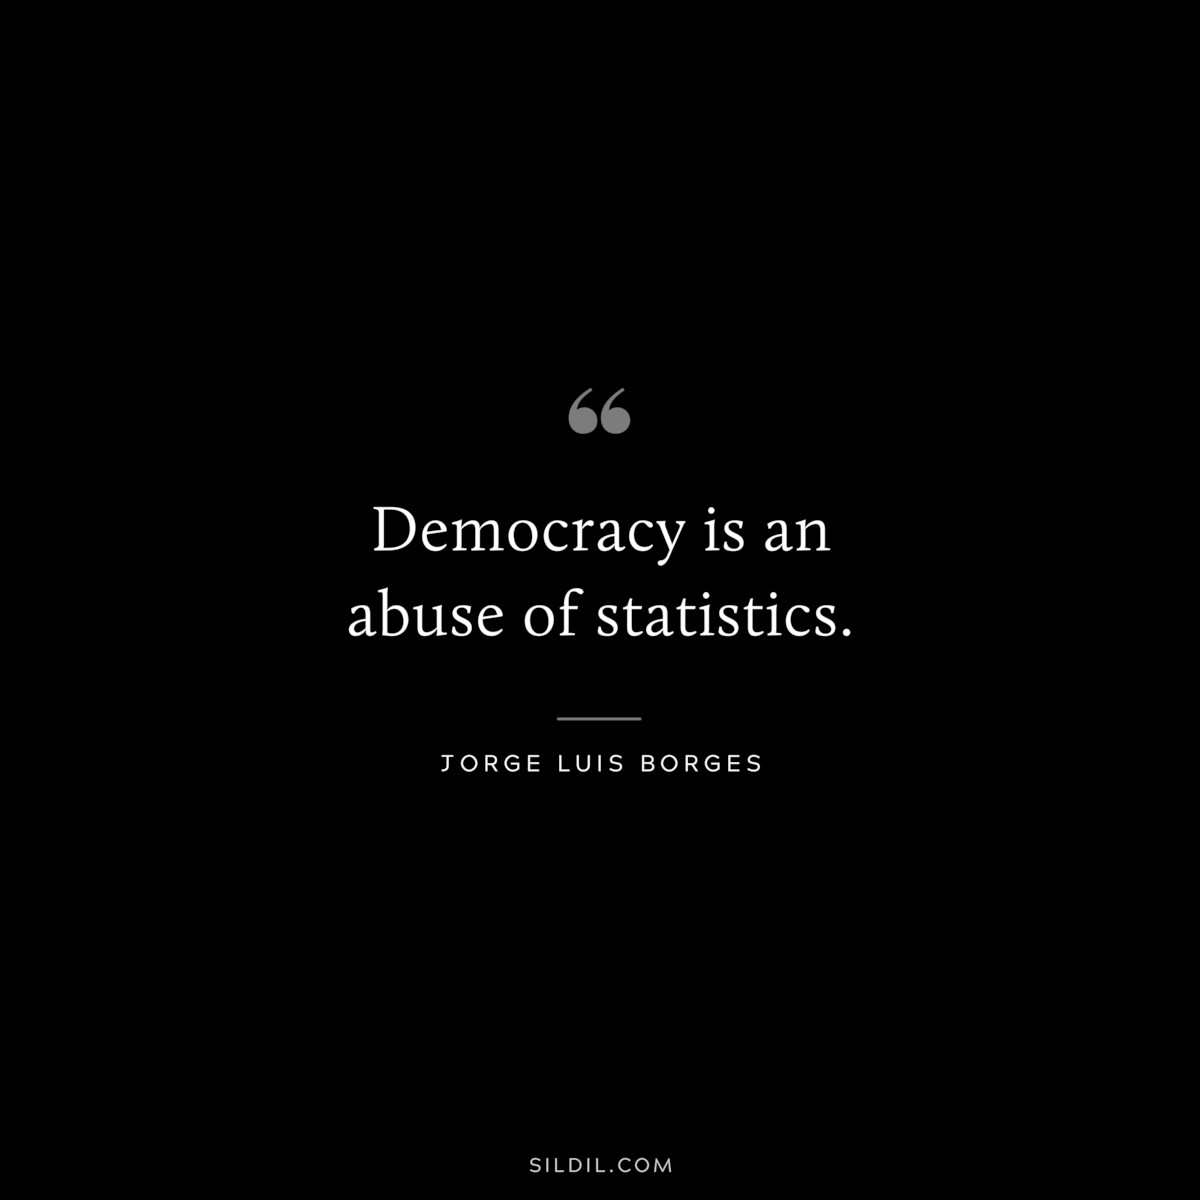 Democracy is an abuse of statistics. ― Jorge Luis Borges